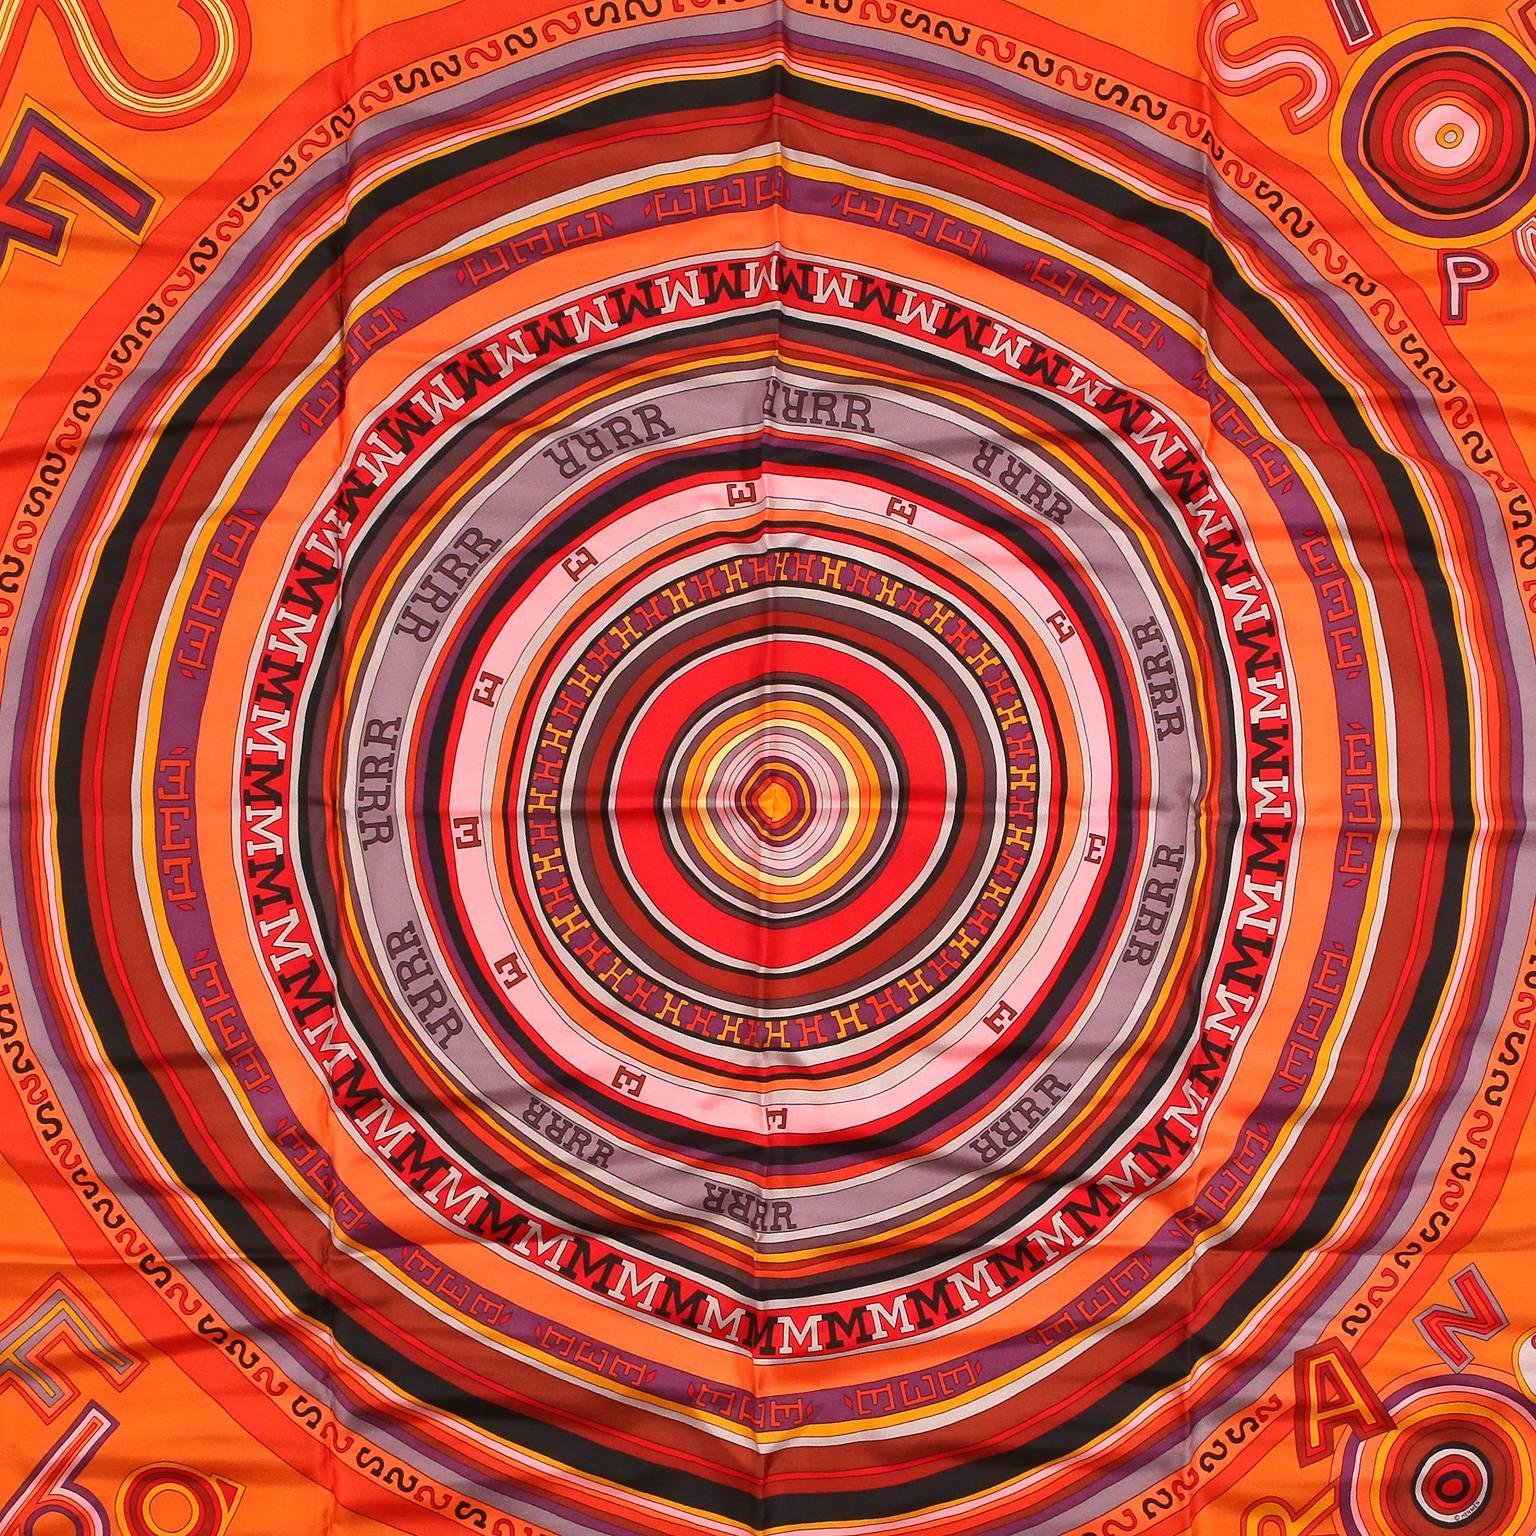 Hermès Orange Tohu Bohu 90 cm Silk Scarf - PRISTINE
 Designed by Claudia Stuhlhofer-Mayr and issued in 2004, it is one of the most coveted and collectible Hermès designs. 
Orange background with a concentric circular pattern and a puzzling array of